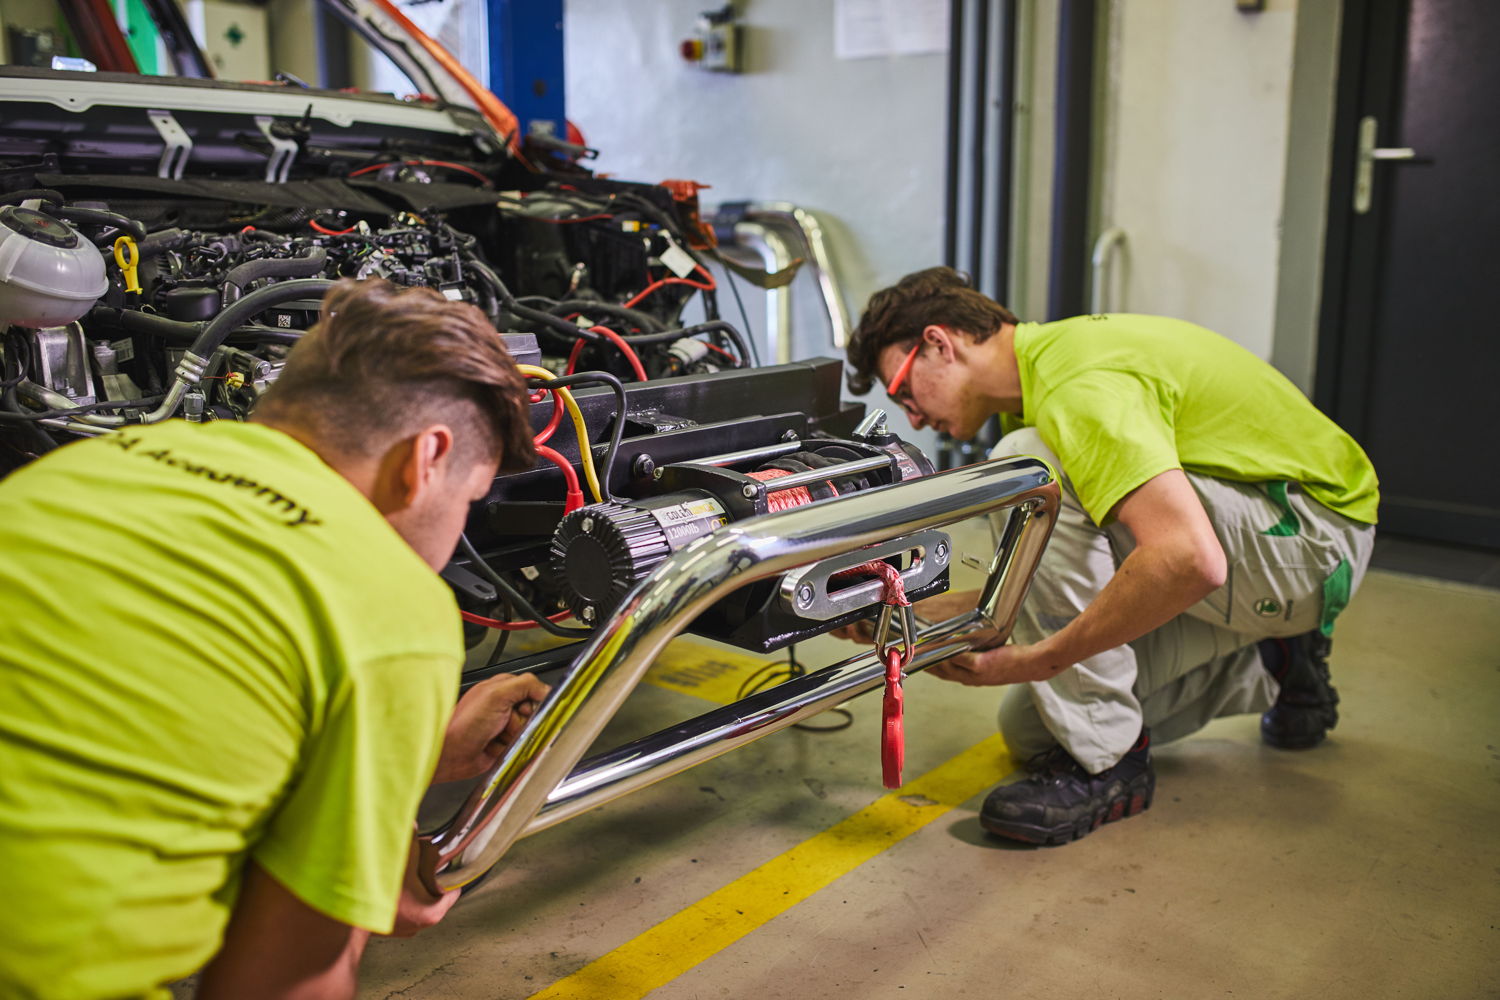 Two apprentices are fitting a bullbar framing a powerful winch
to the front of the ŠKODA MOUNTIAQ.